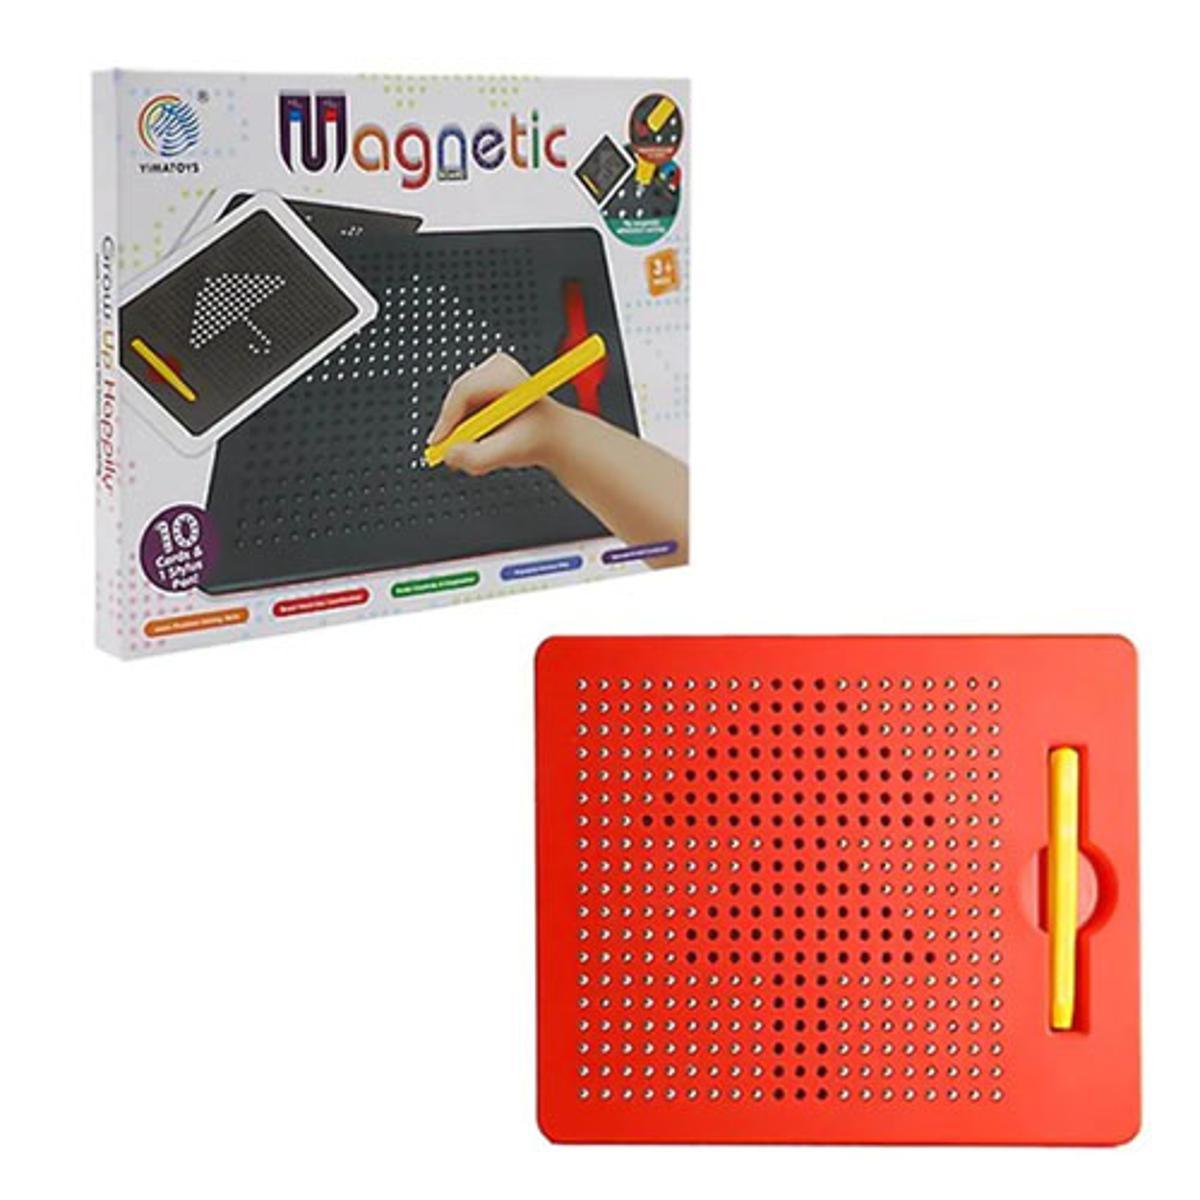 Drawing Magnetic Pad with 10 Pattern Cards For Kids